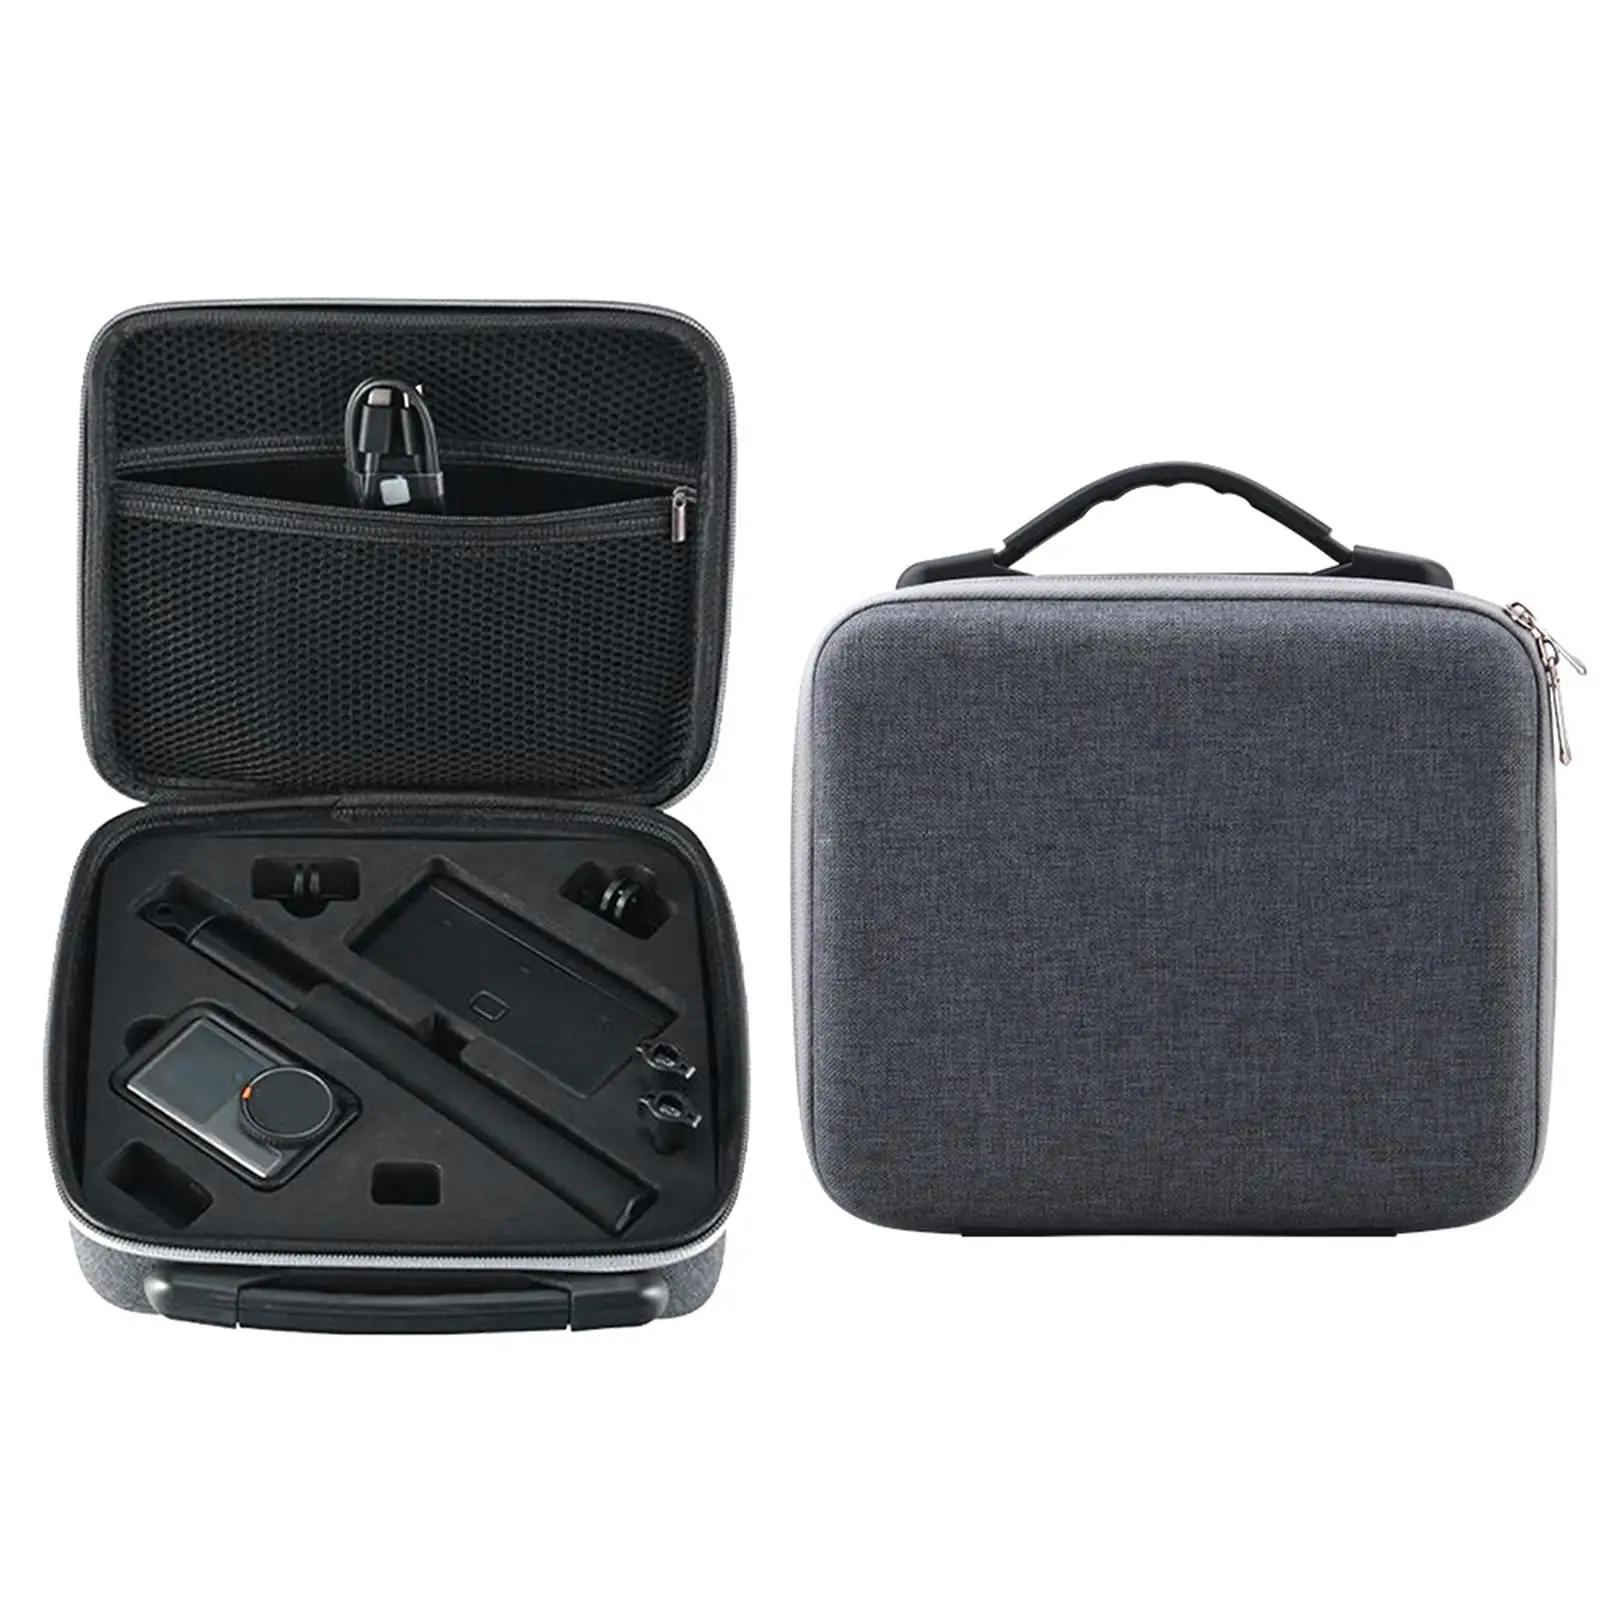 Travel Carrying Case Action Camera Accessories Scratch Resistant Large Capacity with Handle Professional Shockproof Handbag